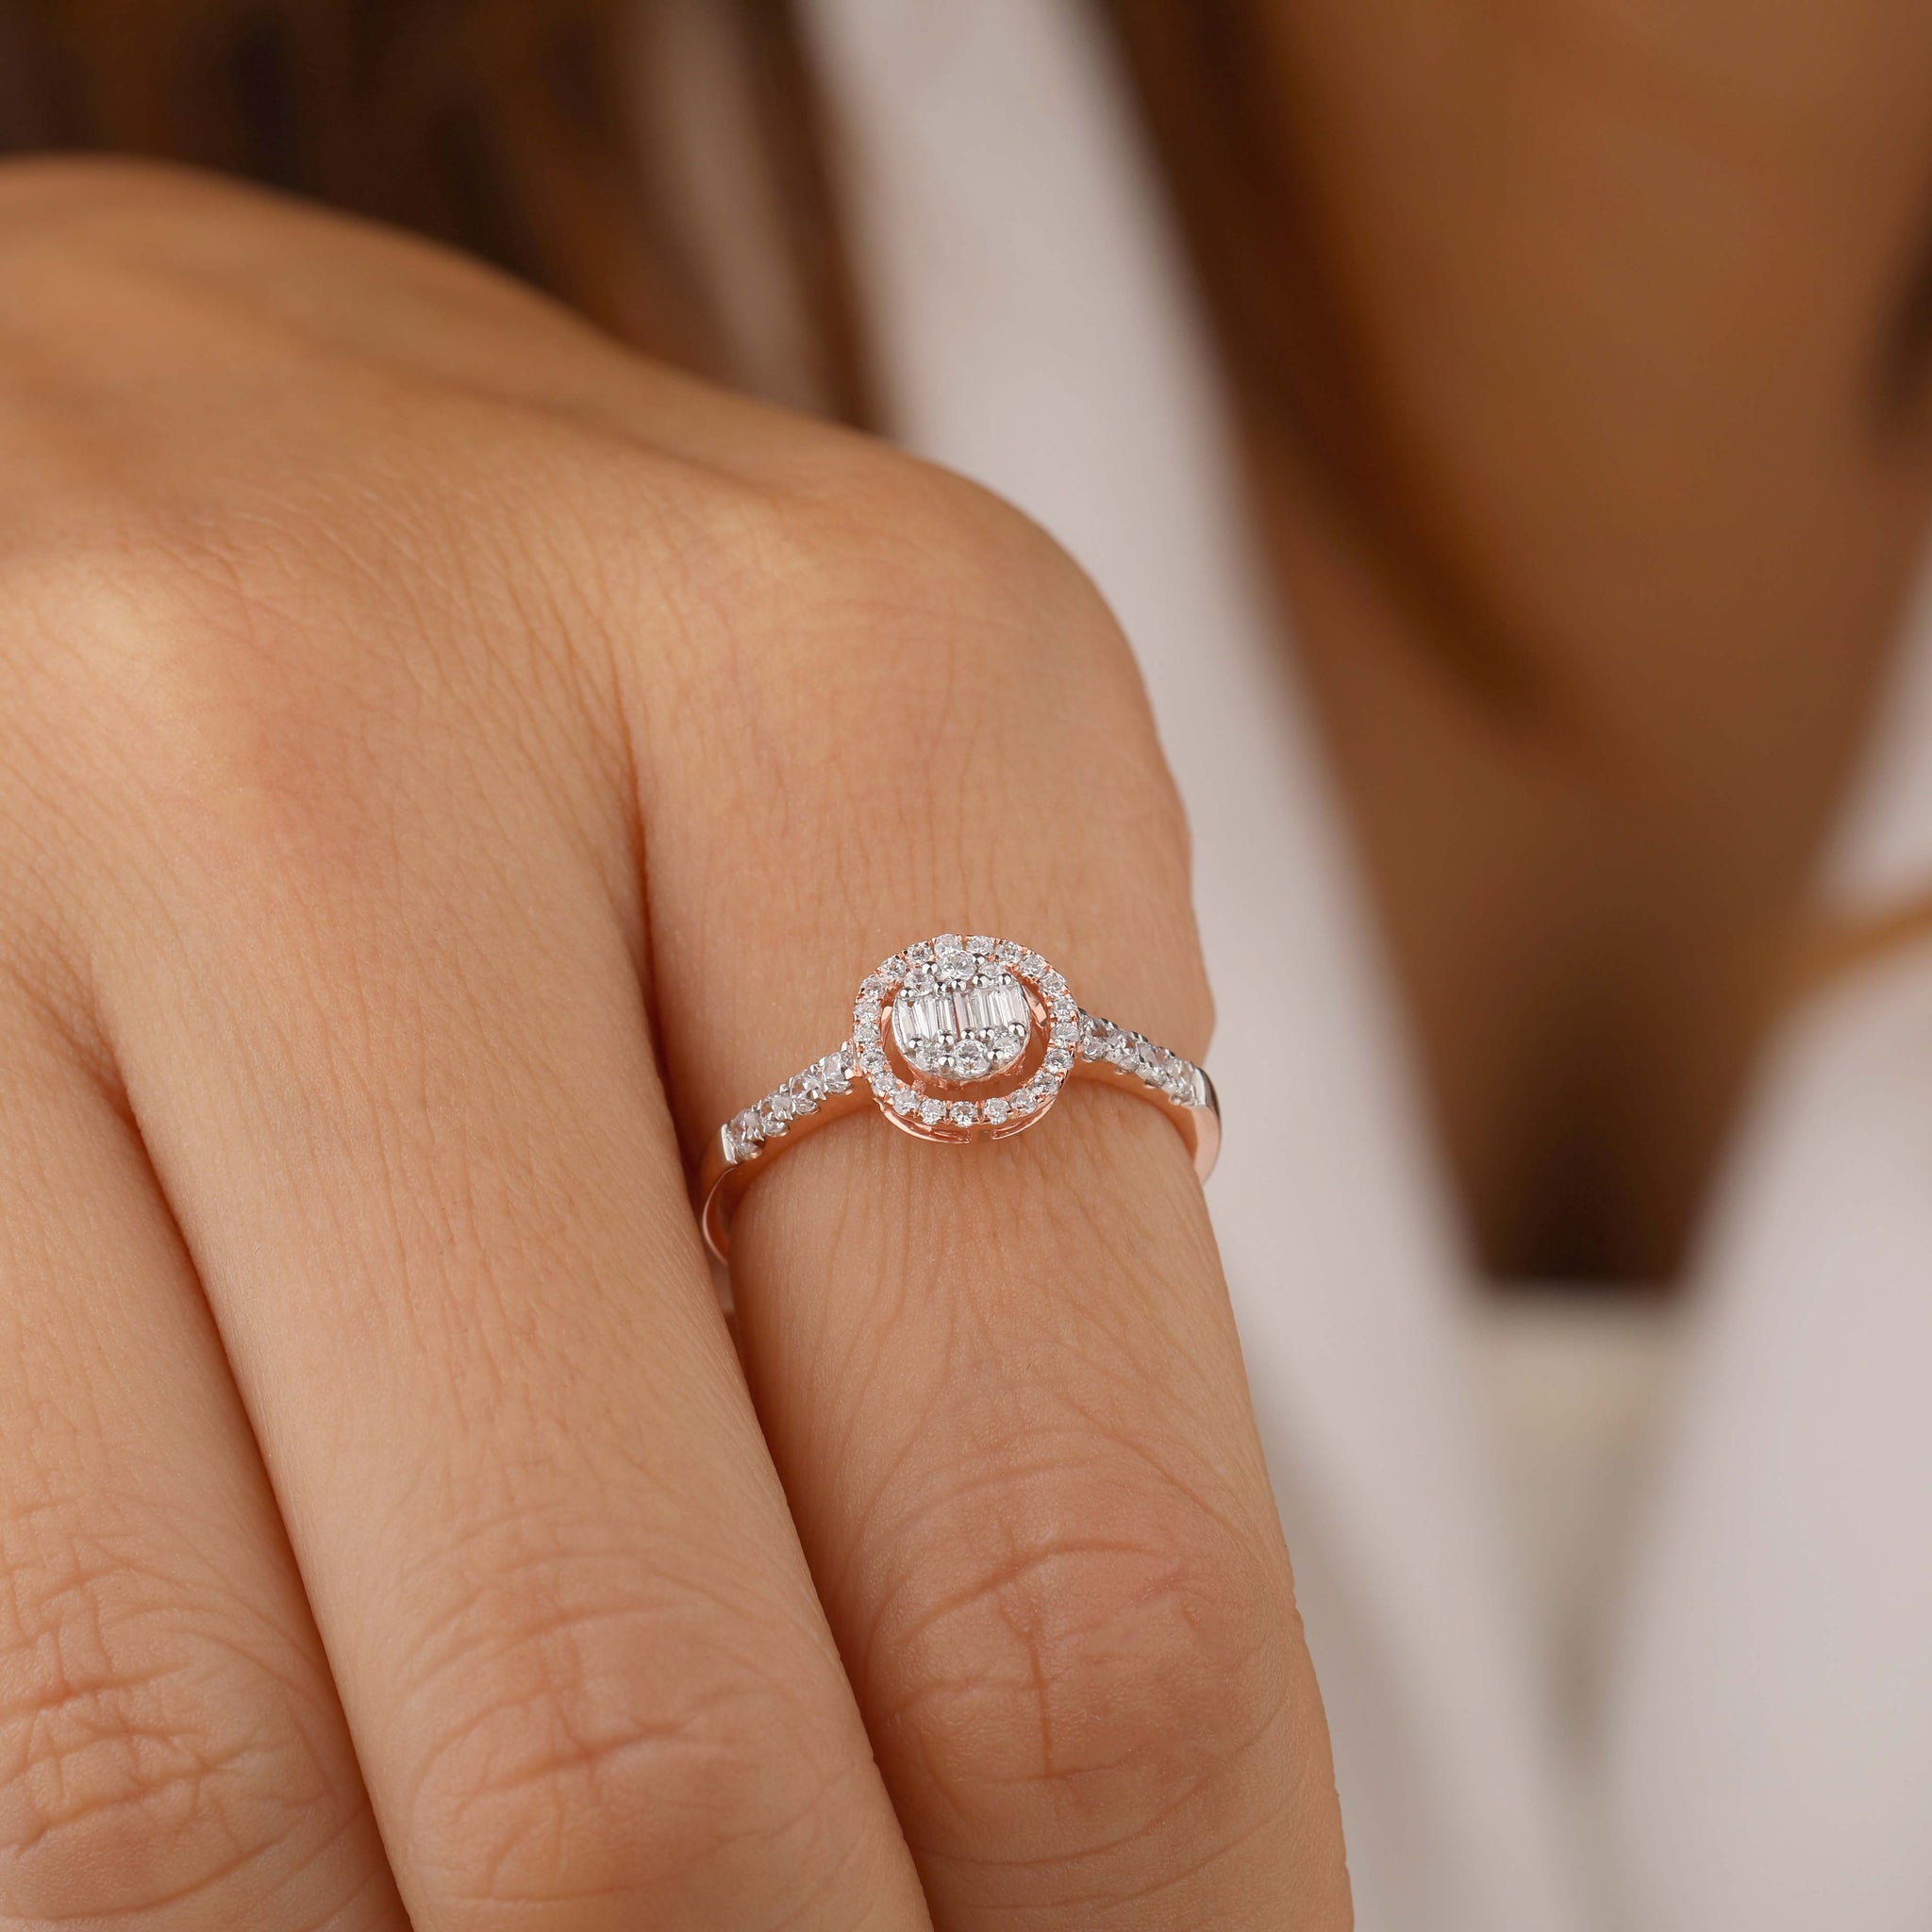 A person Wearing Round halo engagement ring